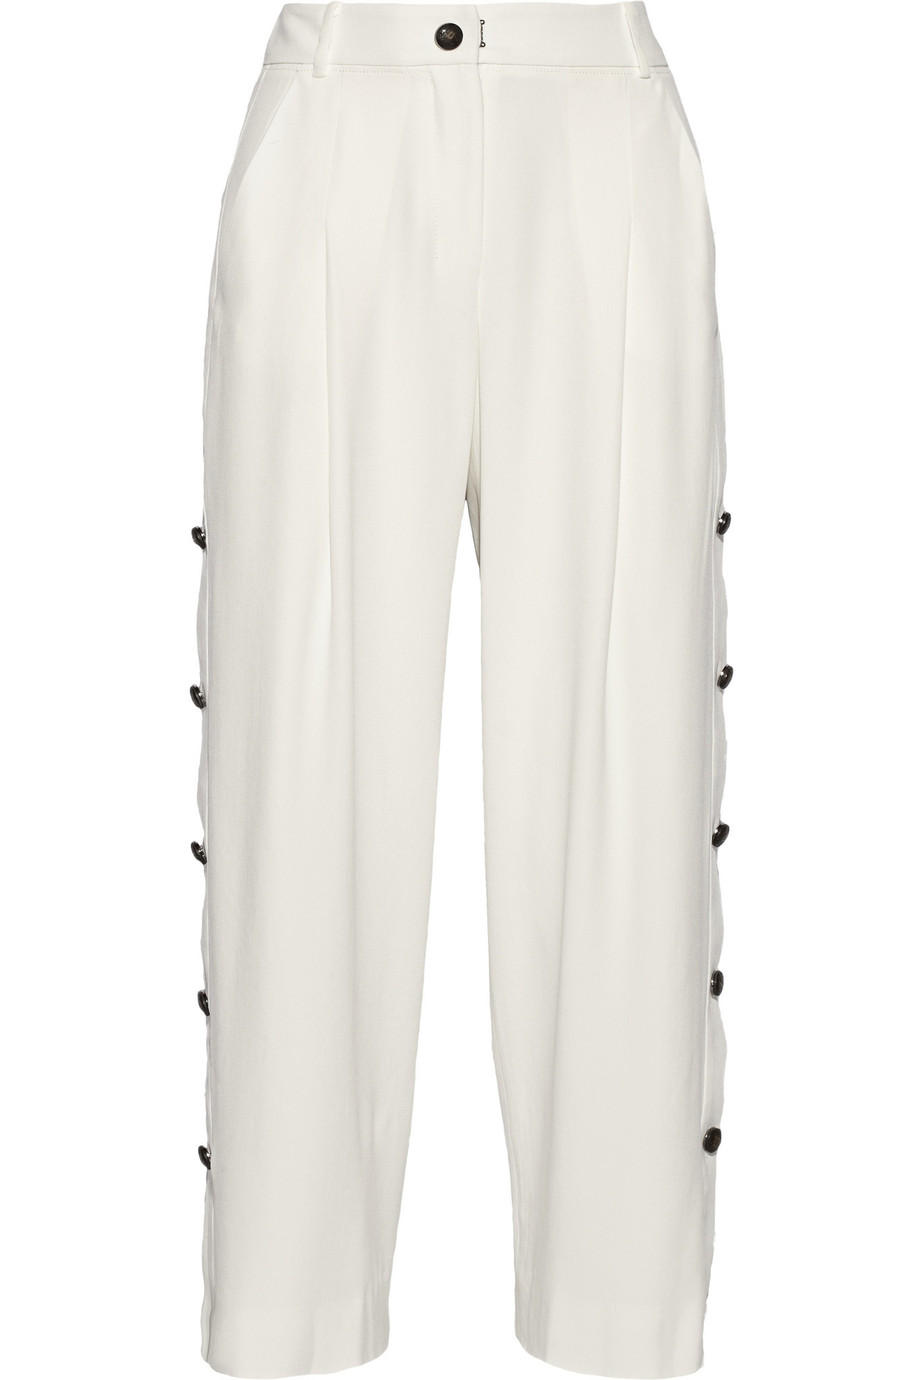 Maiyet Cropped Crepe Wide Leg Pants